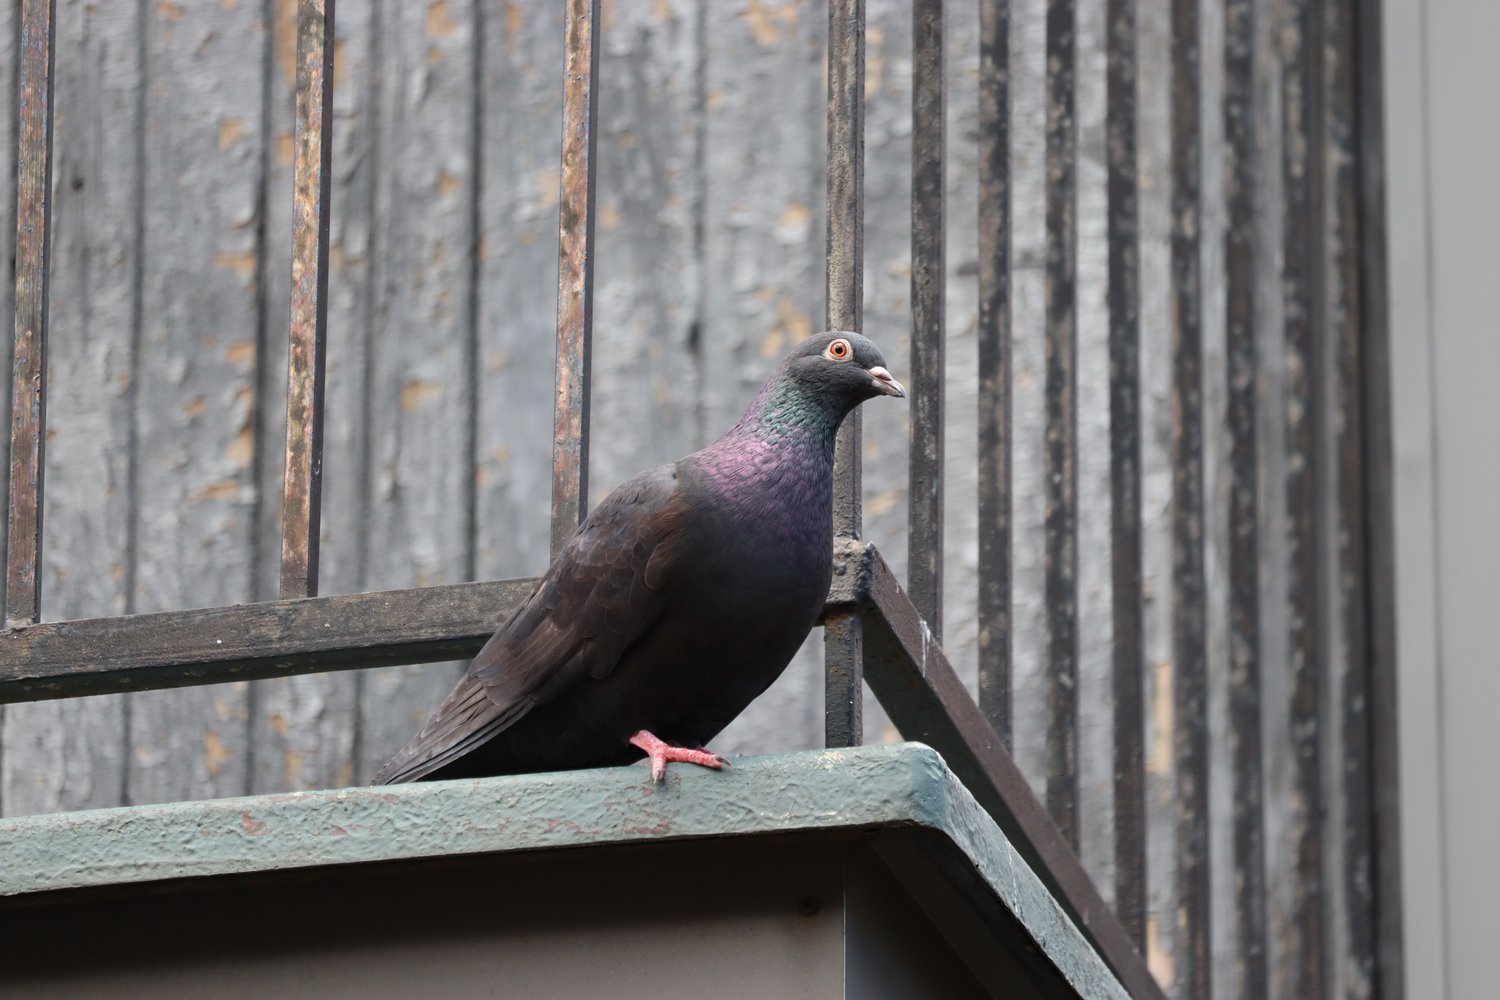 a standard issue city pigeon
standing on the corner of a balcony
with the railing behind it.